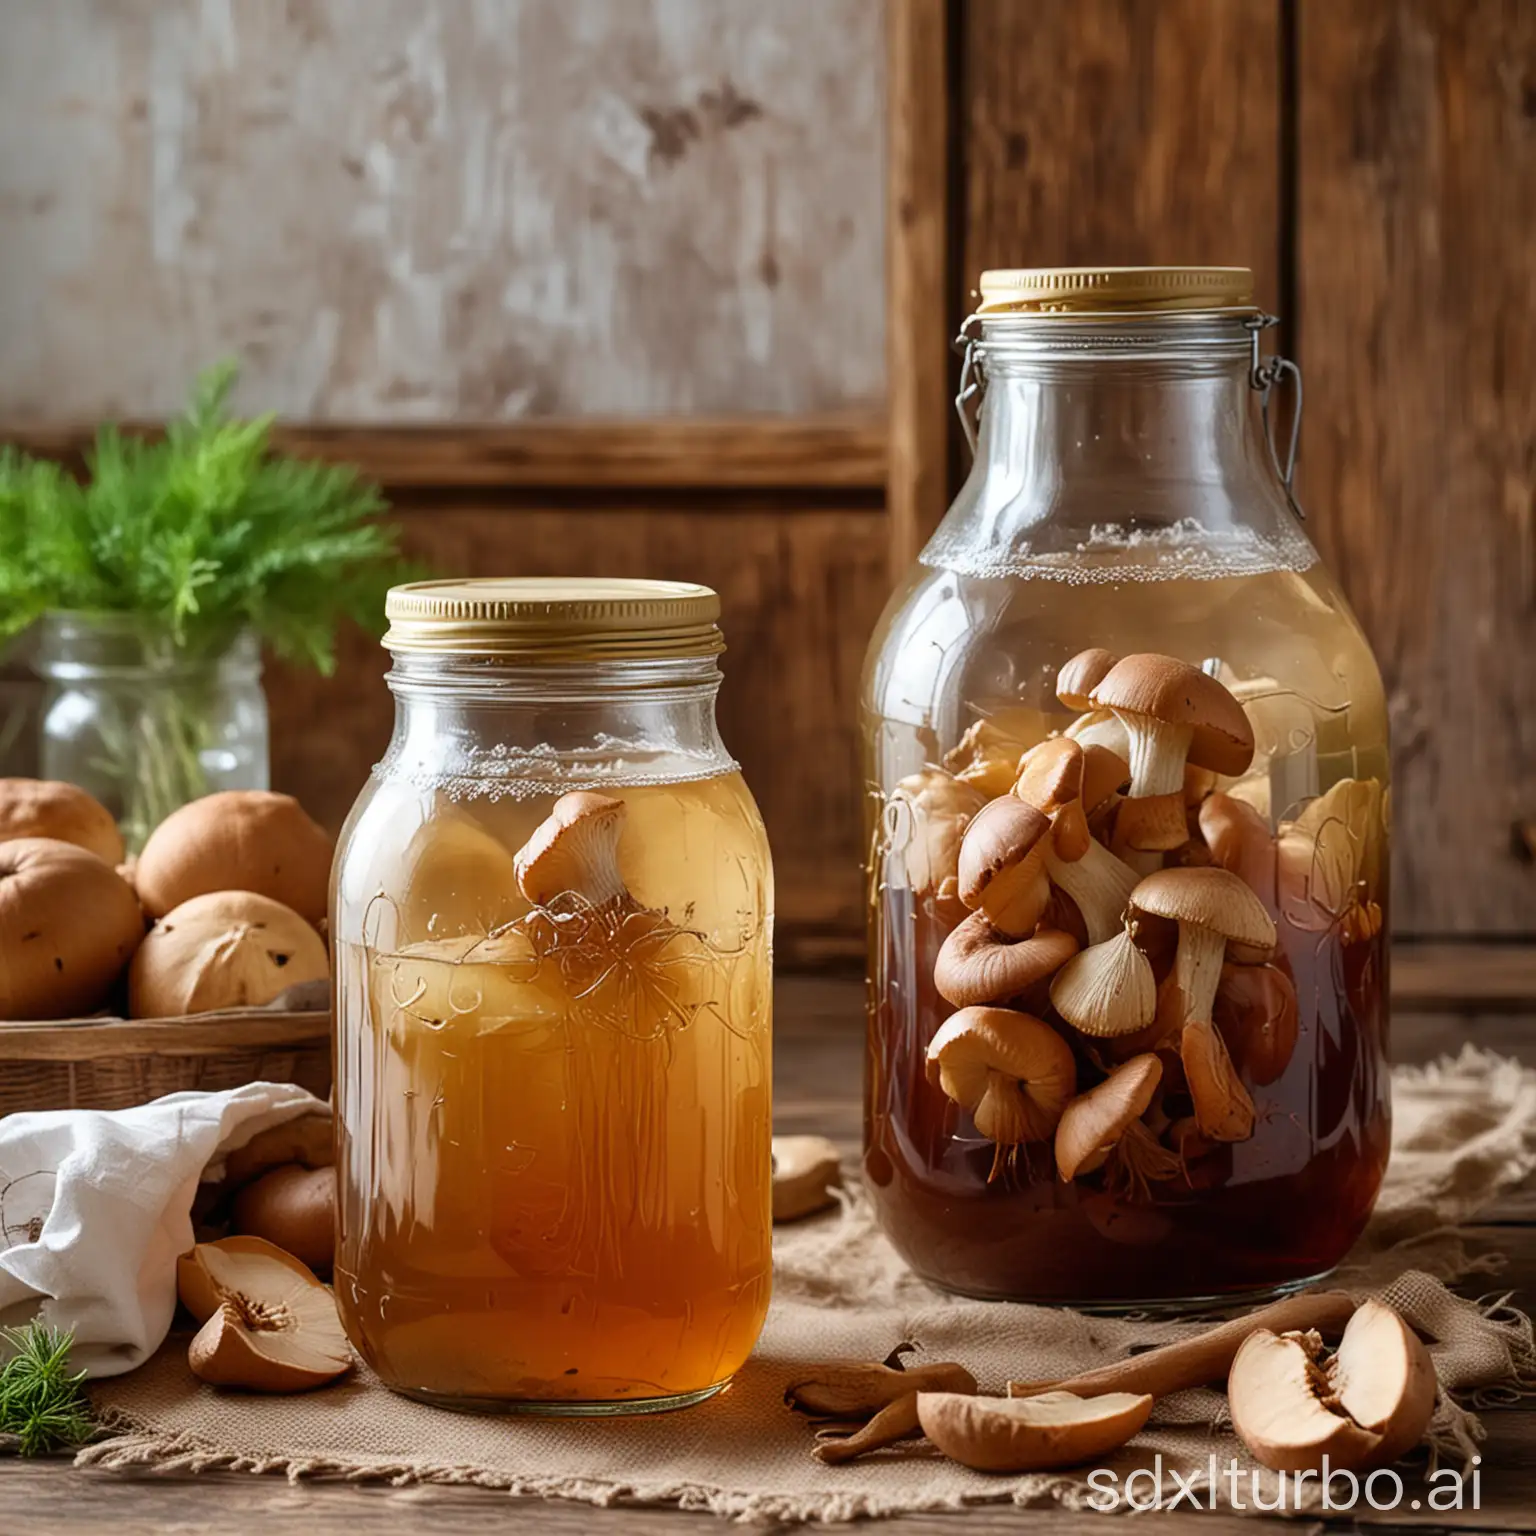 Kombucha in a 1 three-liter jar, Russian kitchen, there are 3 boletus mushrooms on the table next to the jar